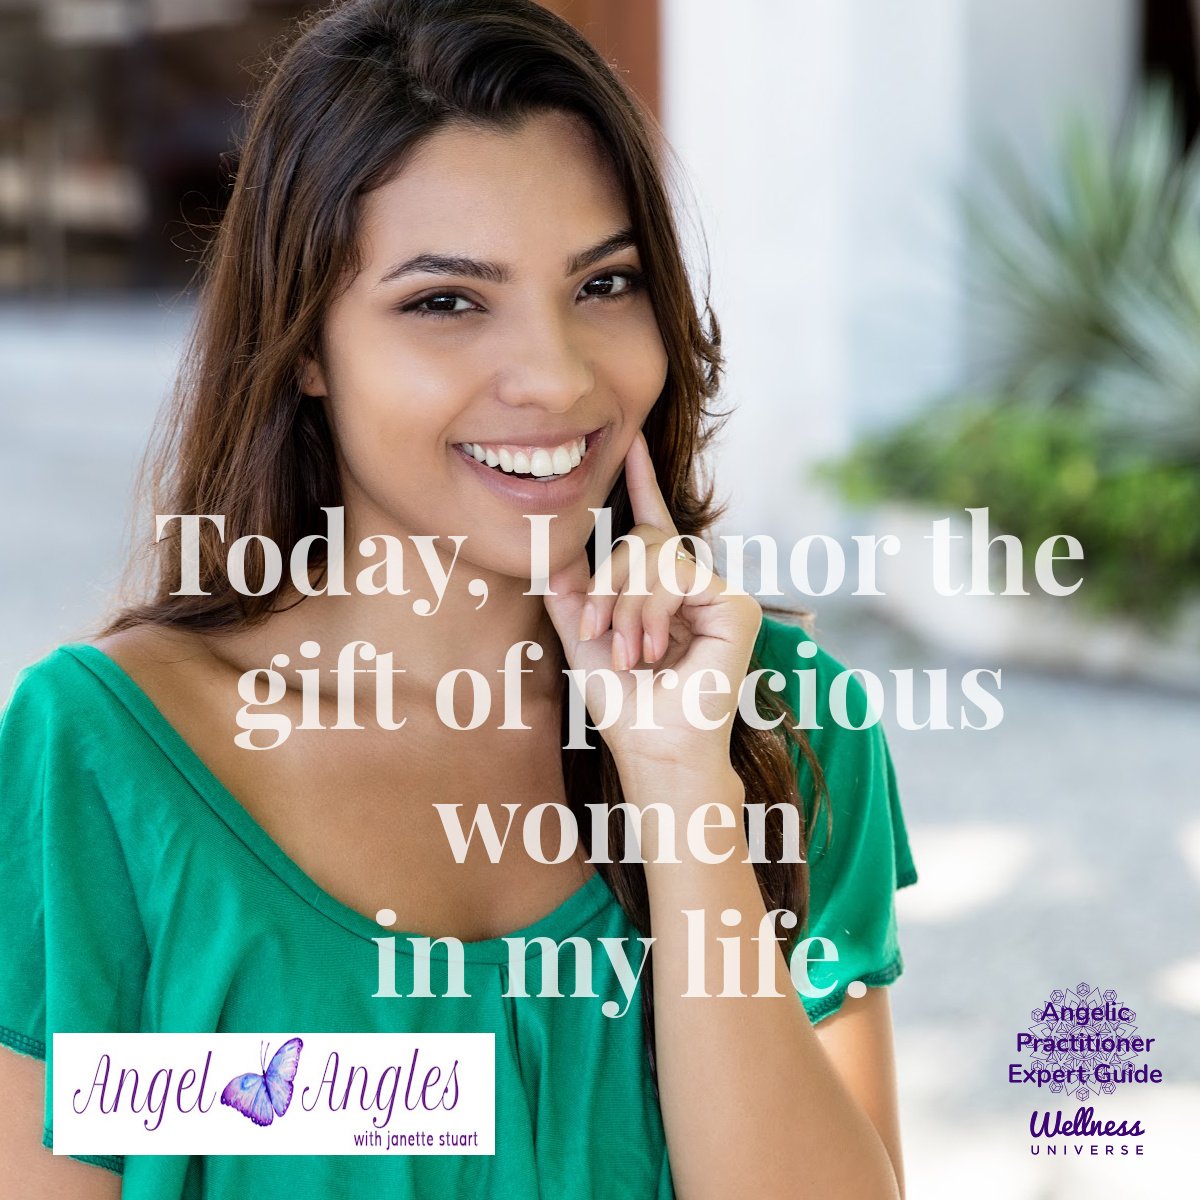 Hello and welcome to your Angel Affirmation for Sunday, May 12, 2024. 

Today, I honor the gift of precious women in my life. Yes! Amen, and so it is. 

Blessings of love, joy, and peace.
Love,
Janette 
.
.
#WUVIP #WUWorldChanger #AngelAffirmations #